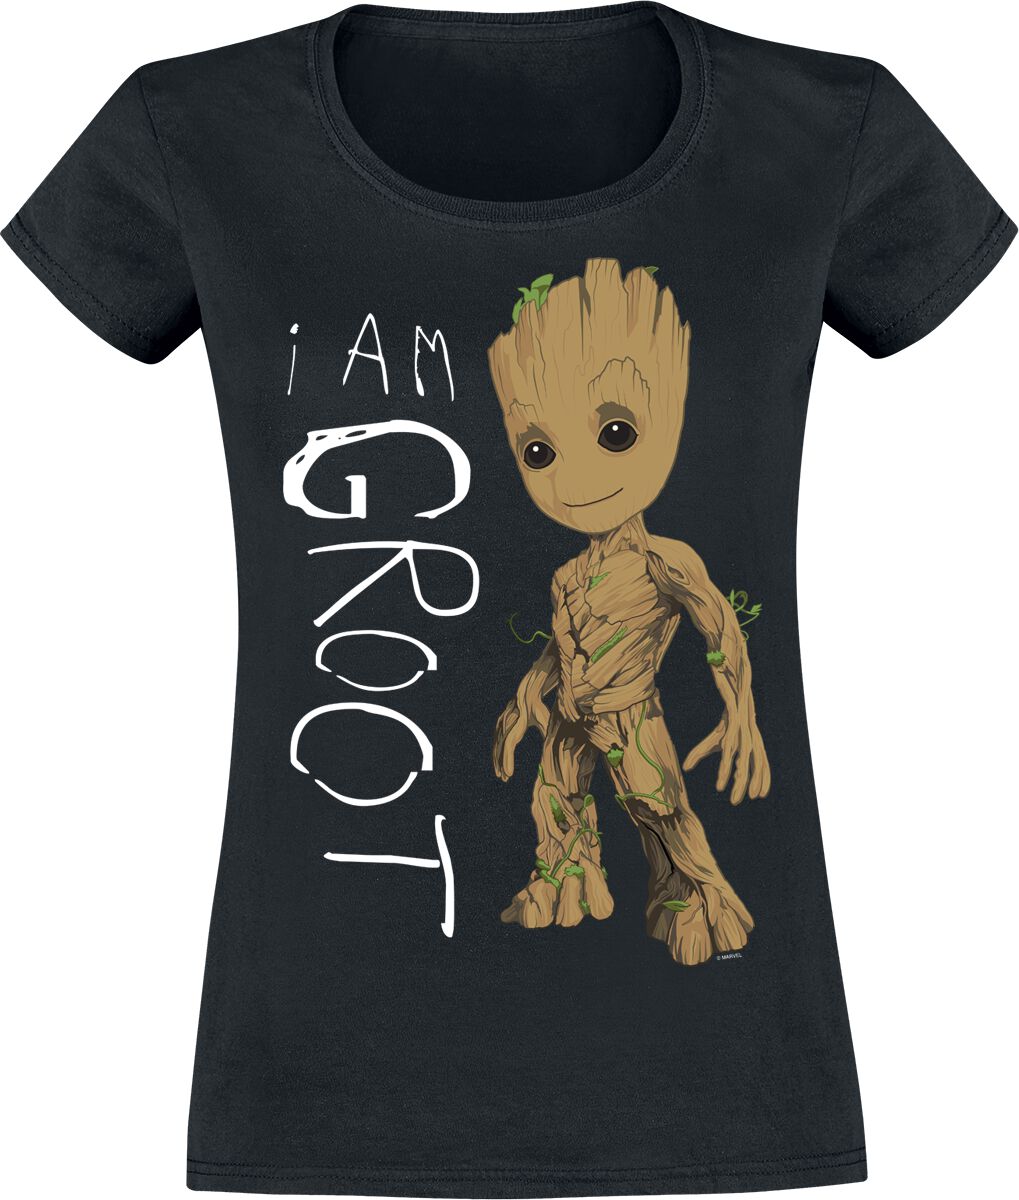 Guardians Of The Galaxy I Am Groot T-Shirt schwarz in XL von Guardians Of The Galaxy